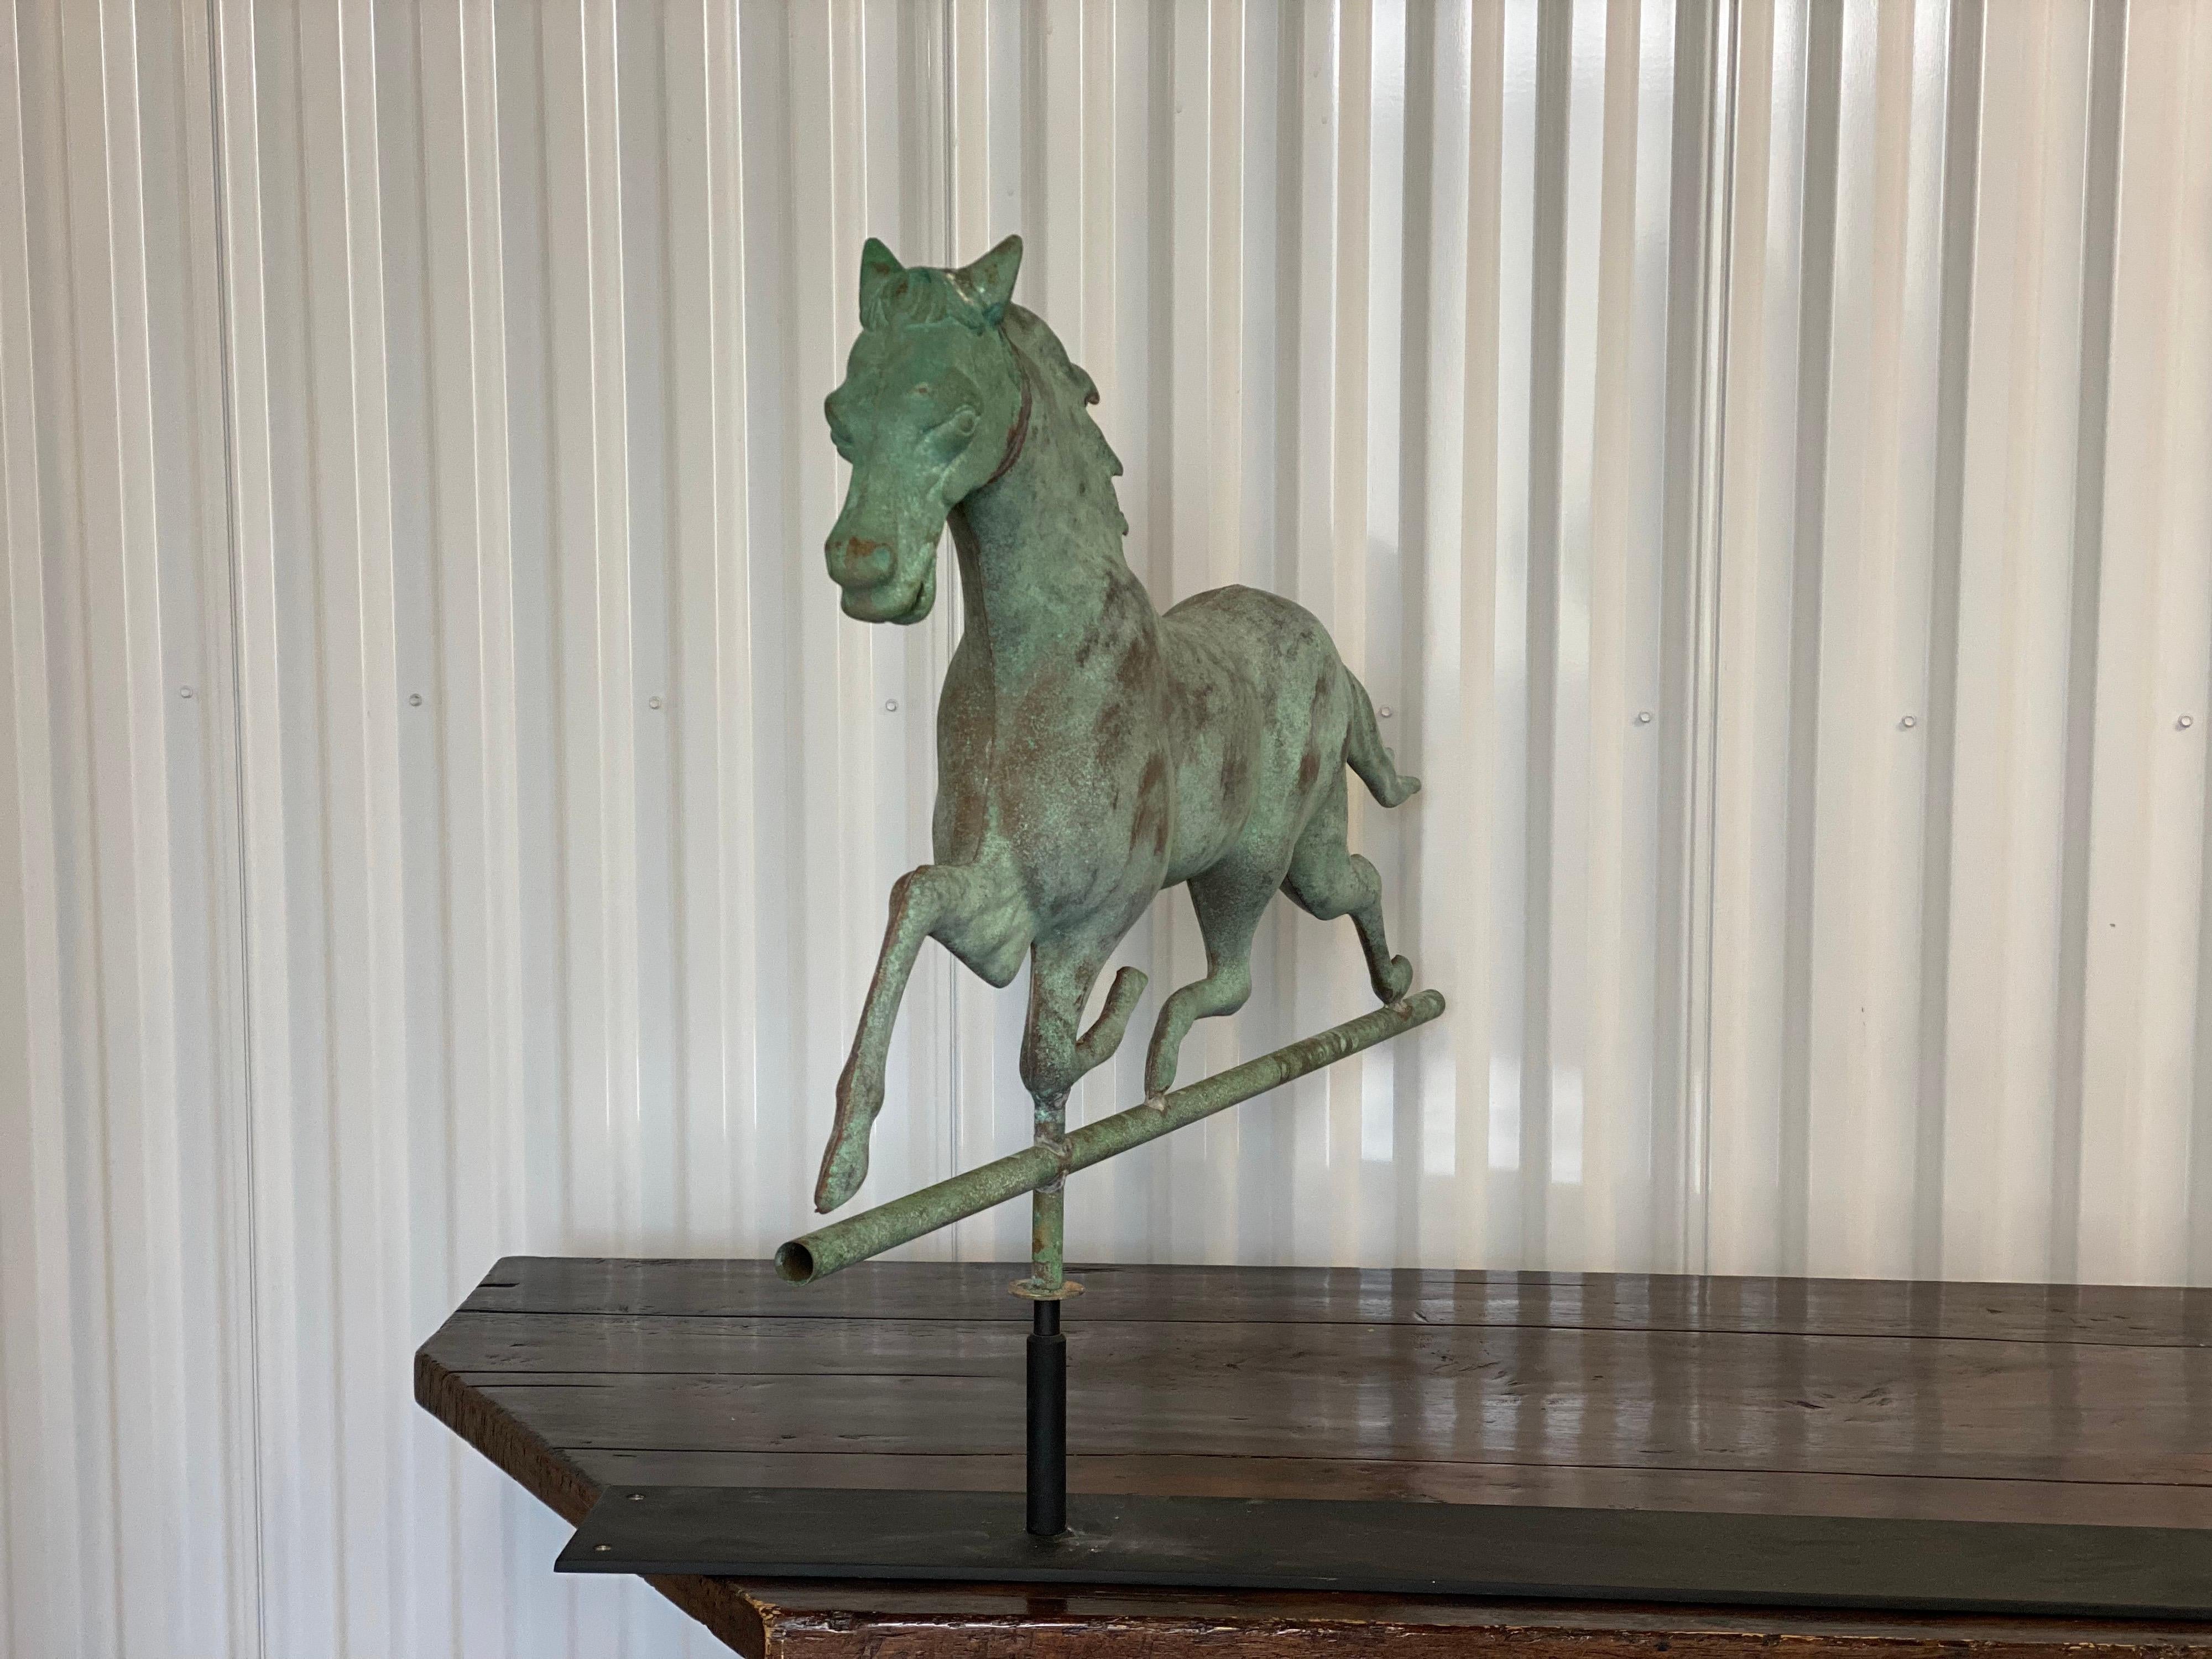 Green Verdigris Horse Weathervane on stand, Attributed to Ethan Allen.
A beautifully patinated verdigris iron running horse weathervase from the 19th century, attributed to Ethan Allen. On custom iron stand.

34